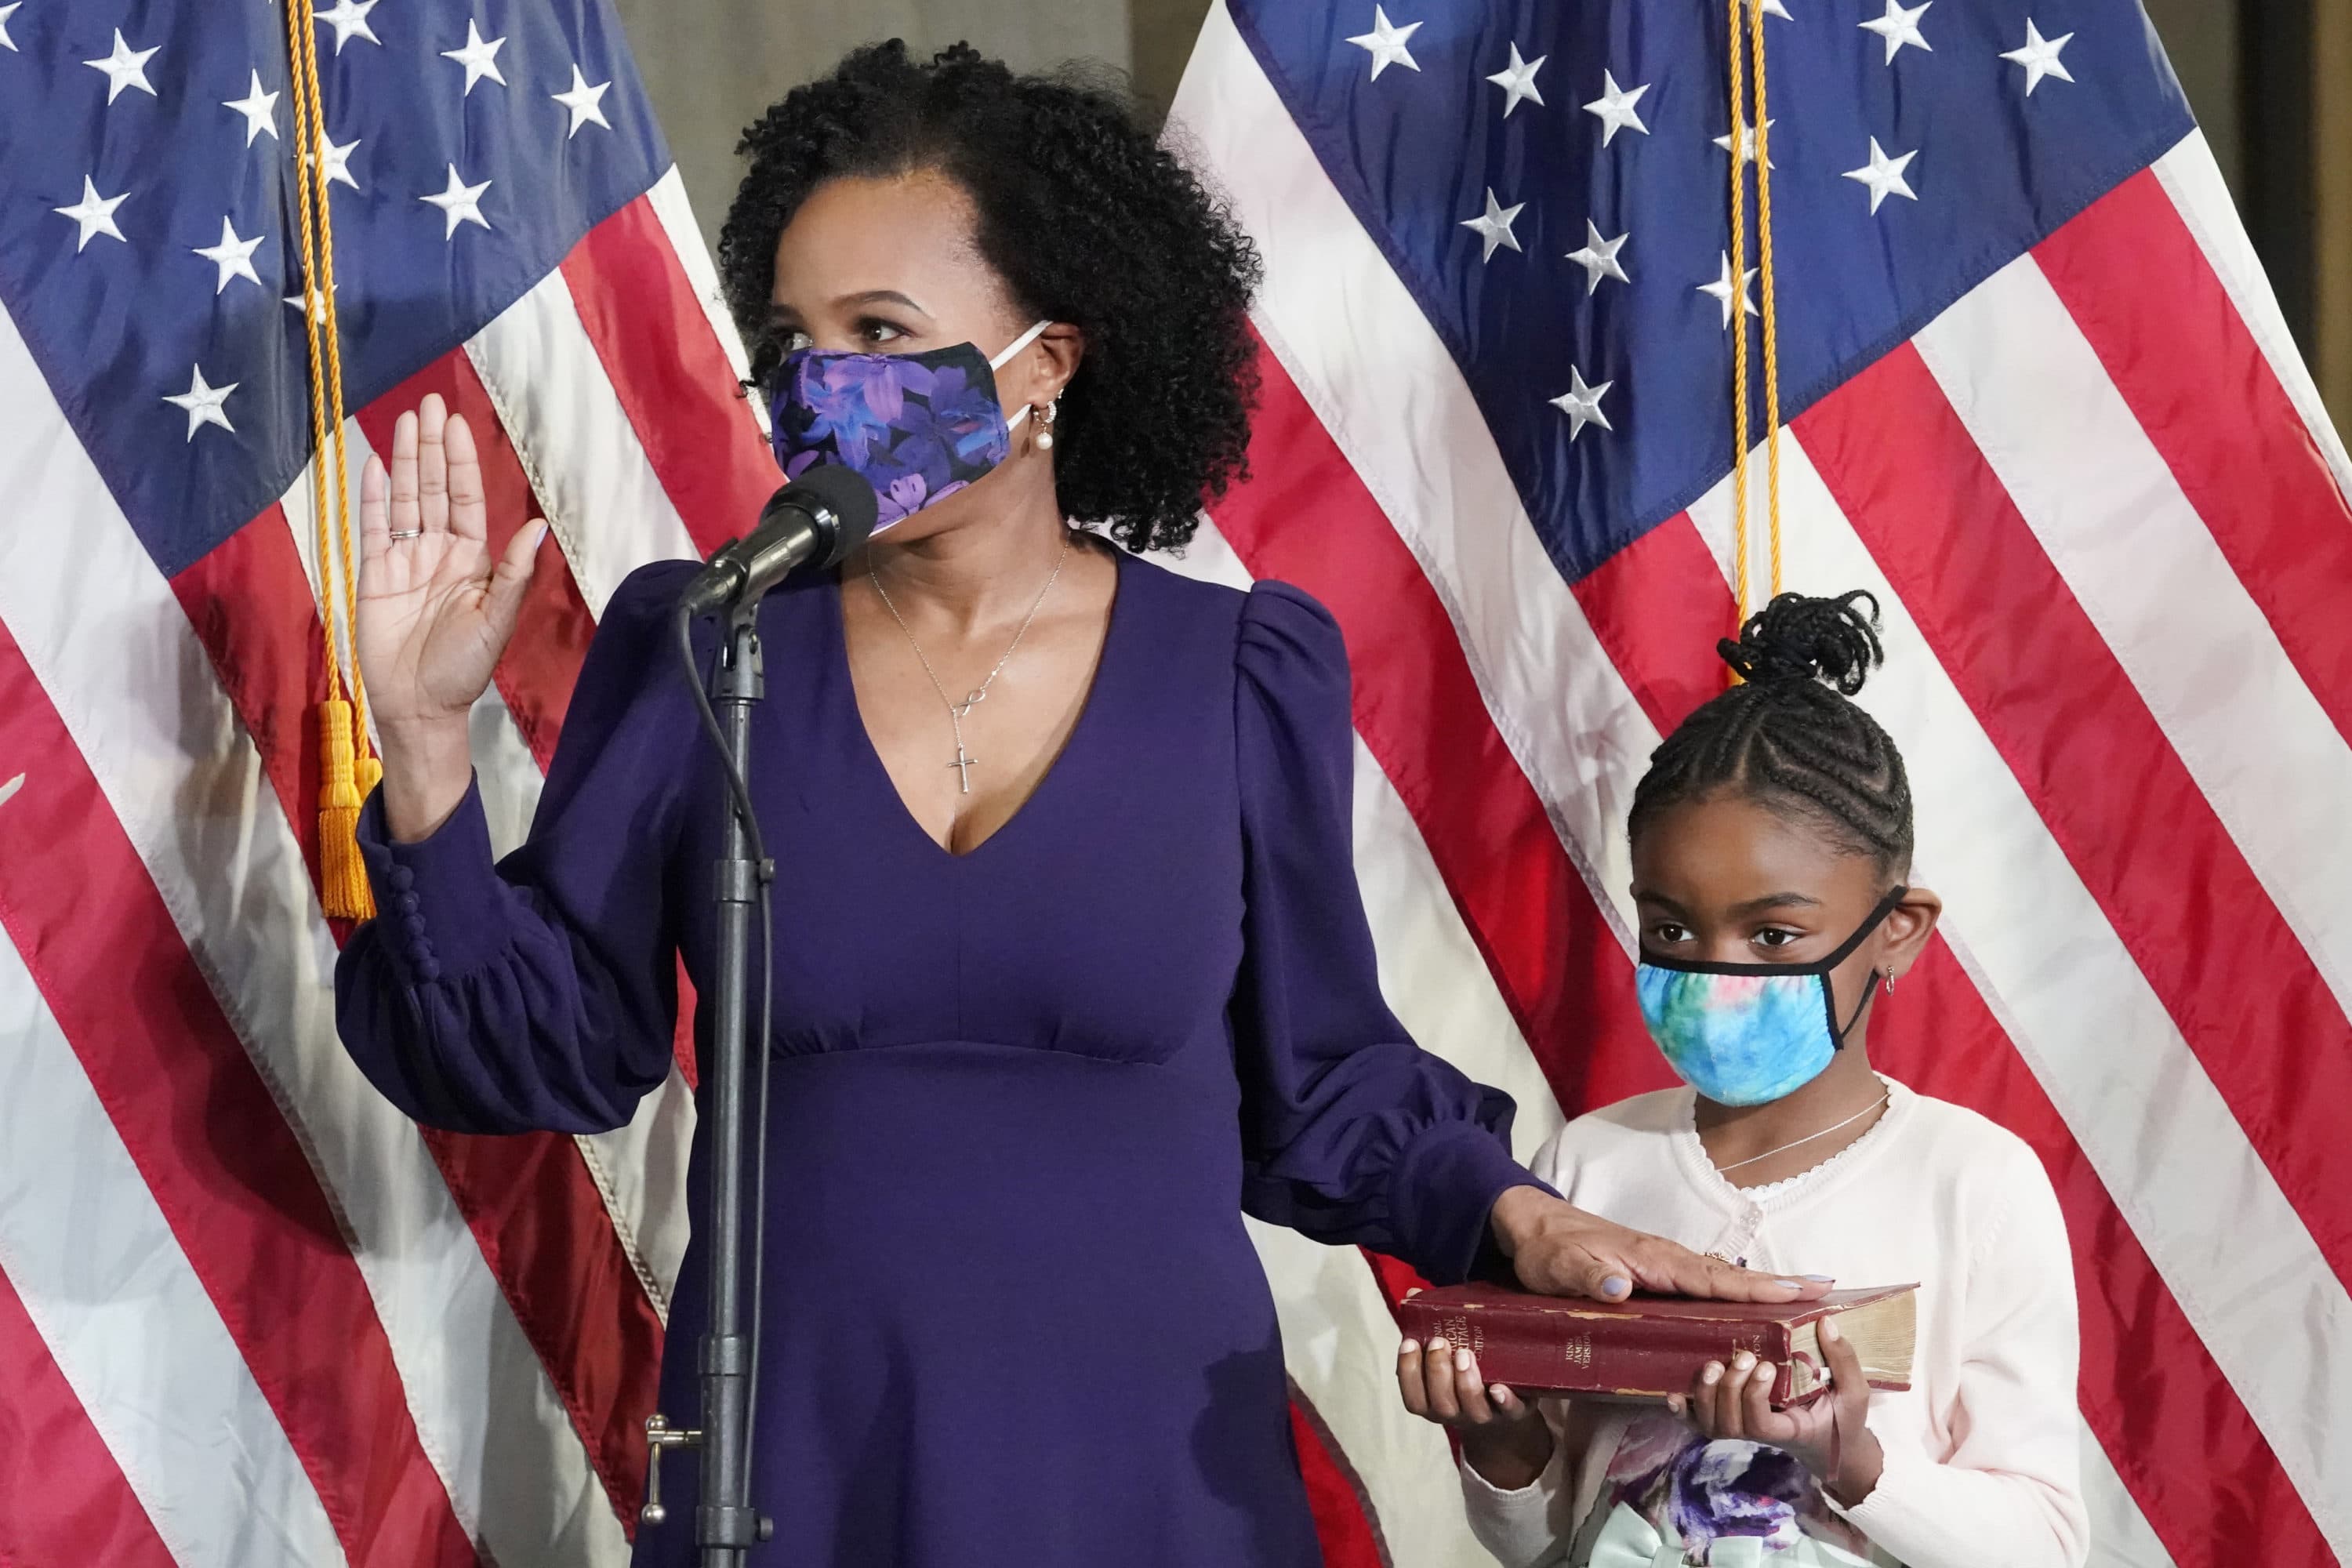 Former Boston City Council President Kim Janey is sworn in as Boston's new mayor at City Hall while her granddaughter, Rosie, holds a Bible, on March 24 in Boston. (Elise Amendola/AP)